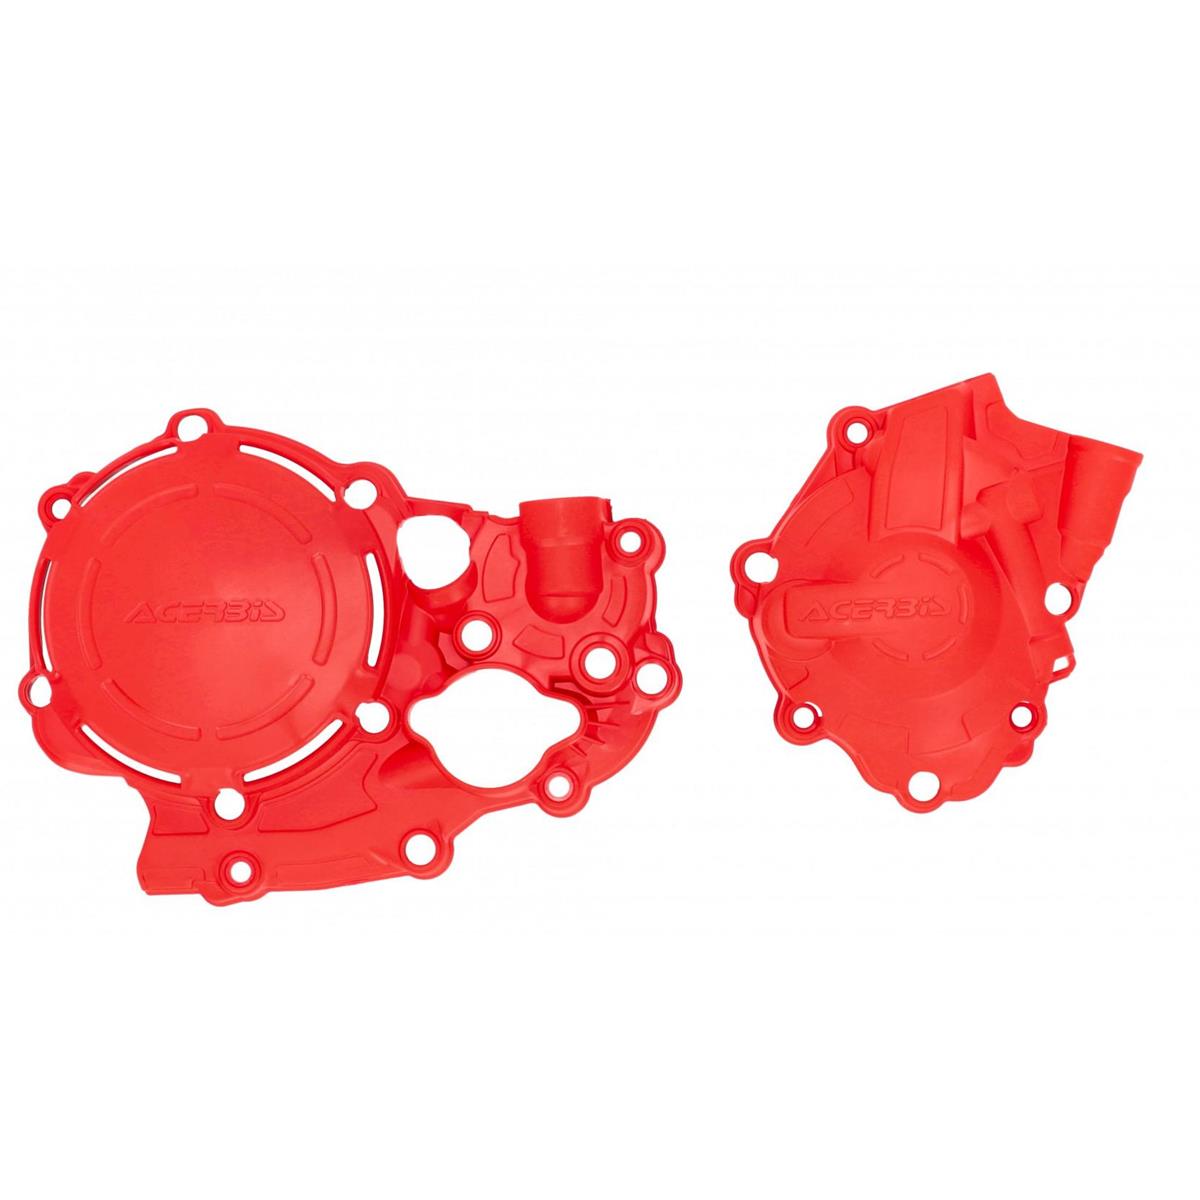 Acerbis Clutch/Ignition Cover Protection X-Power Honda CRF 250R 22-, Red